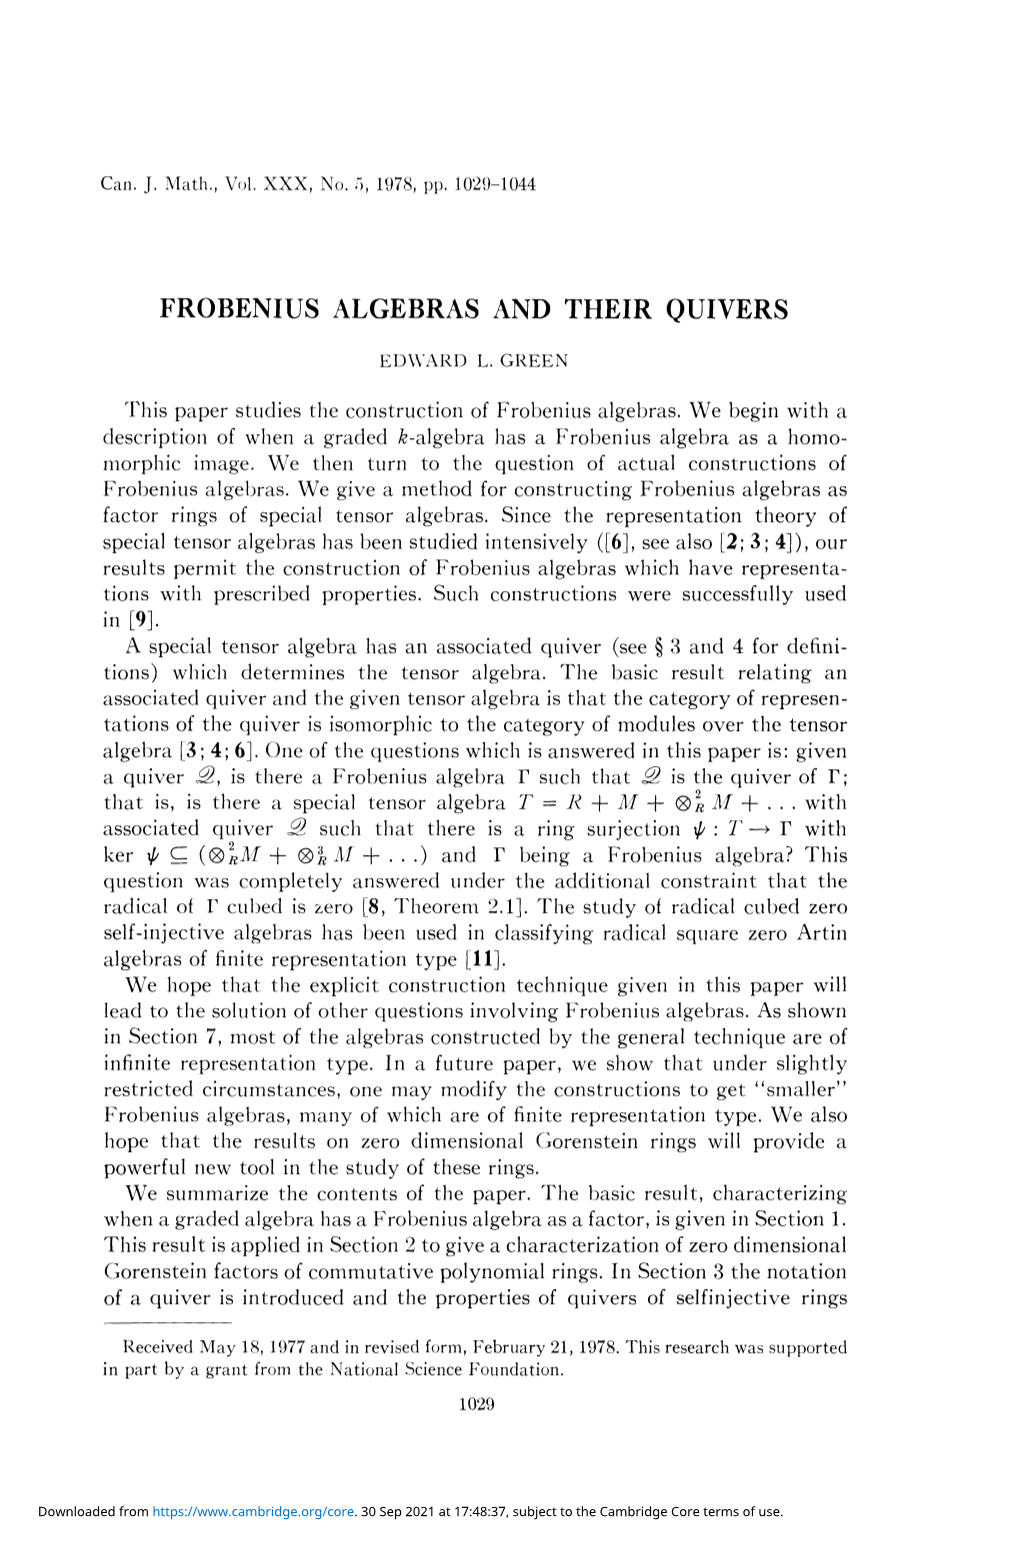 Frobenius Algebras and Their Quivers